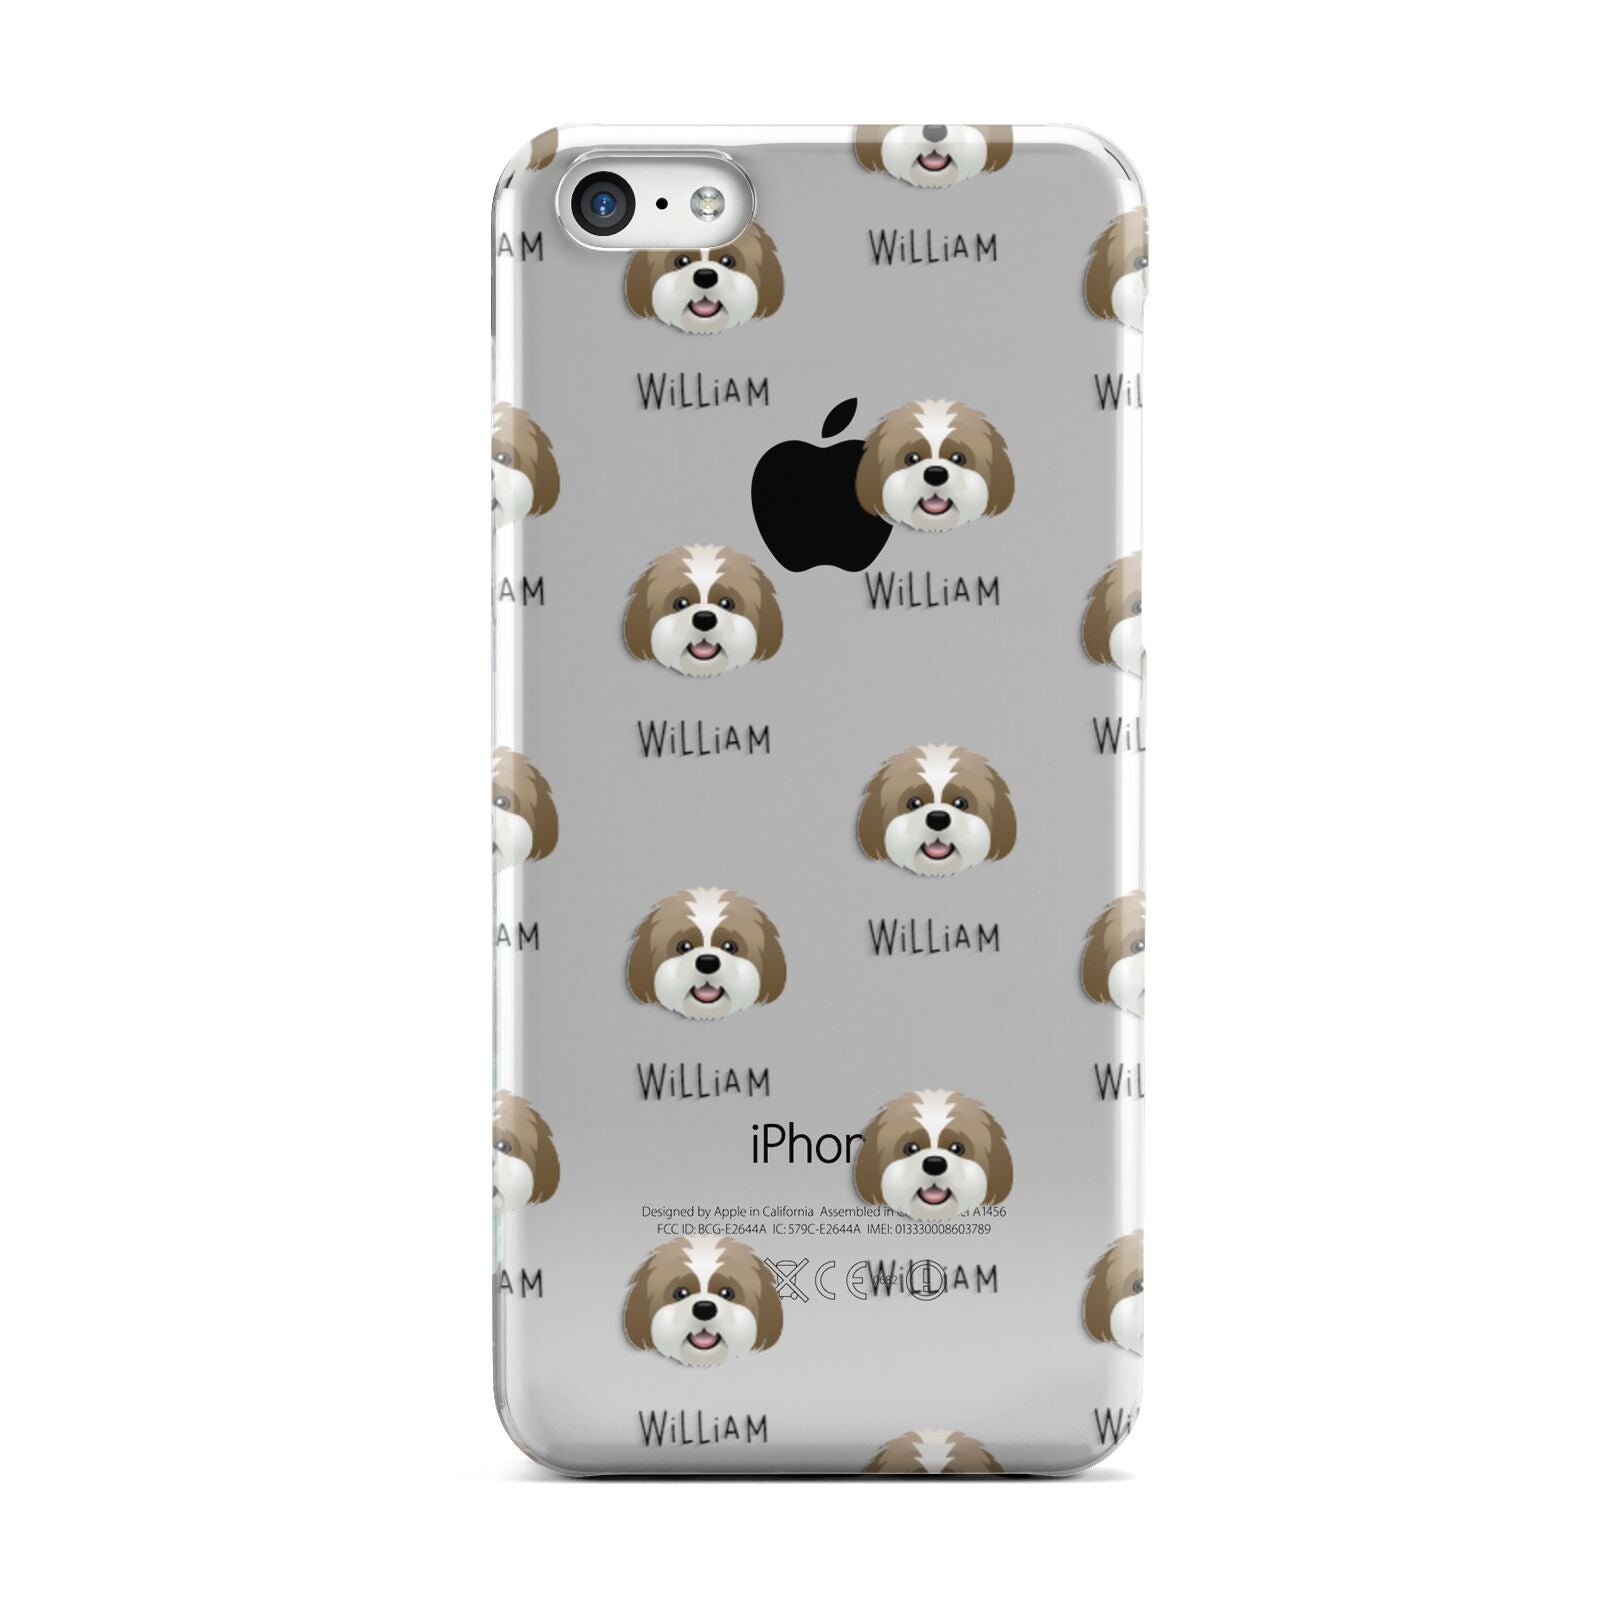 Lhatese Icon with Name Apple iPhone 5c Case